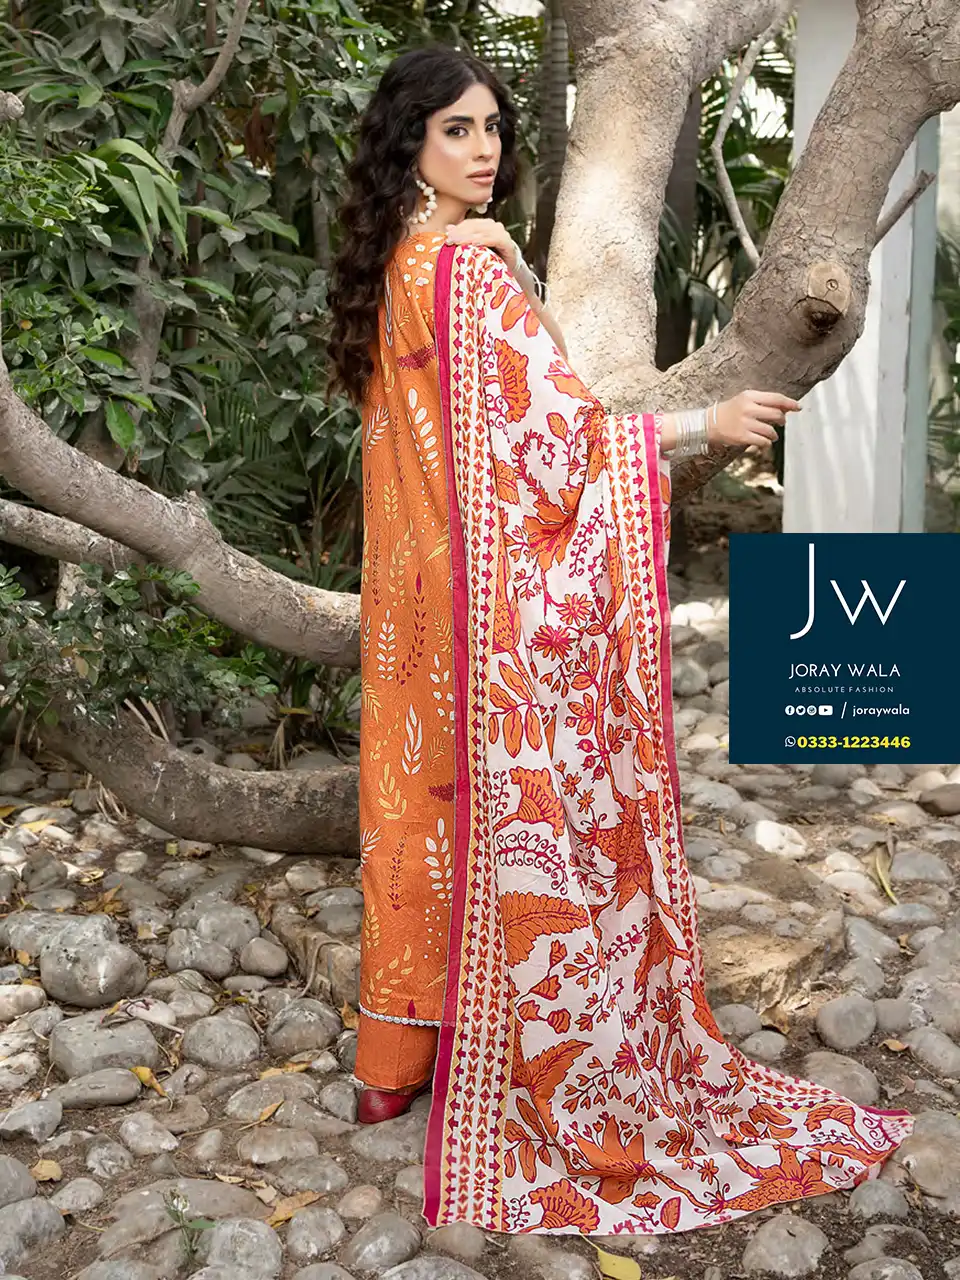 Zesh Summer Printed Lawn 2024 D4 available with free delivery at joraywala. 100% Original.